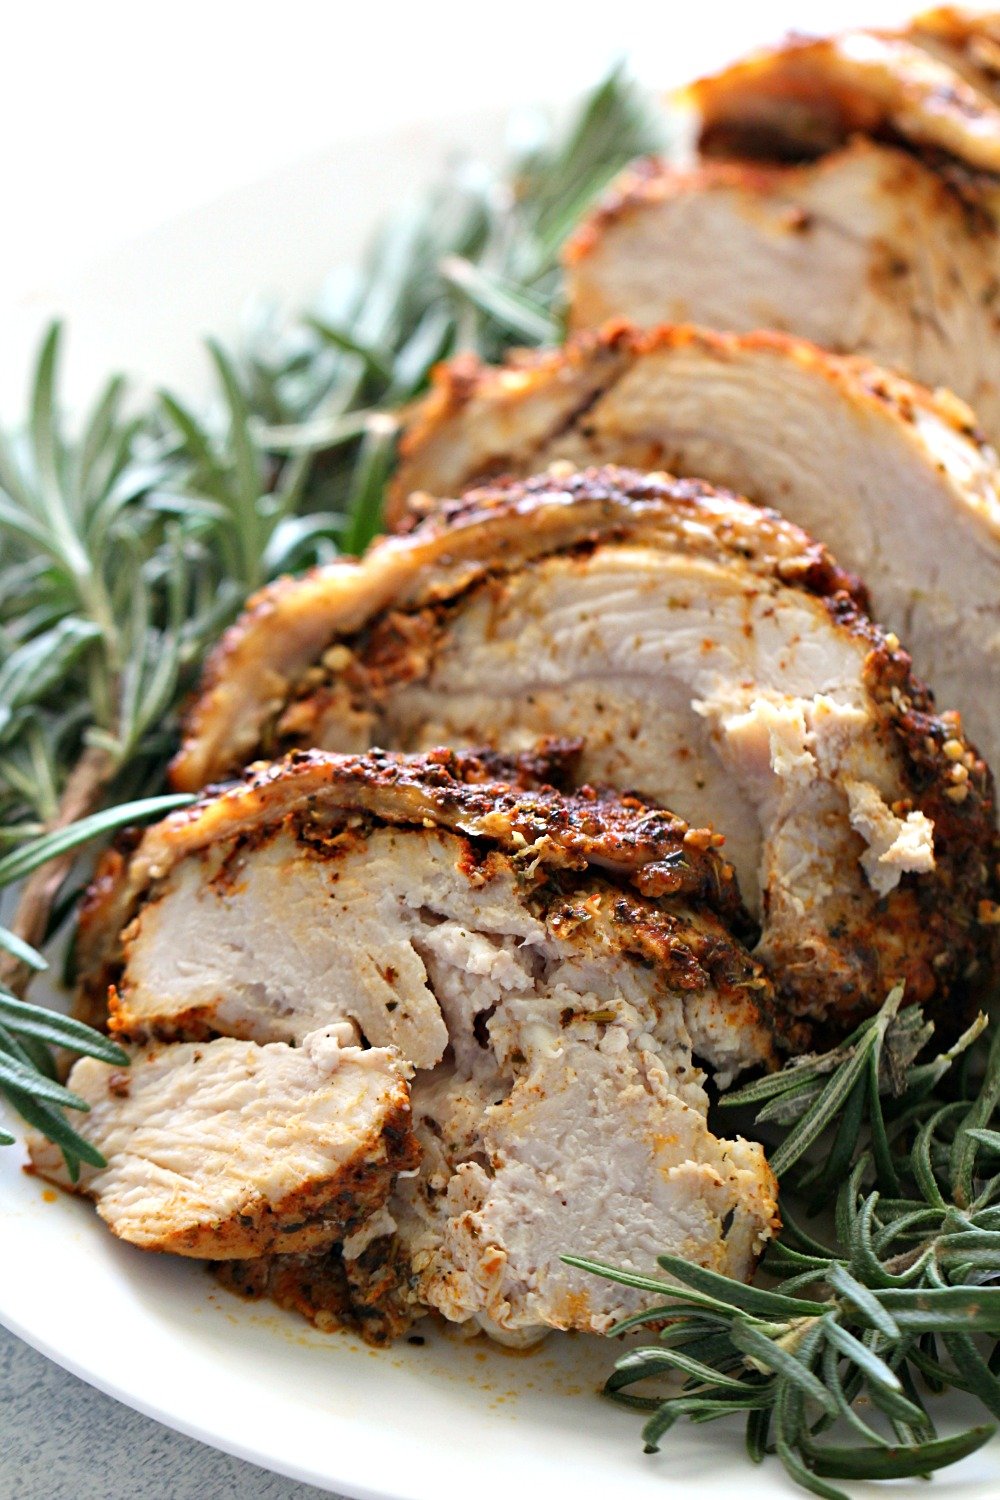 cooked turkey breast sliced and on a plate with rosemary sprigs